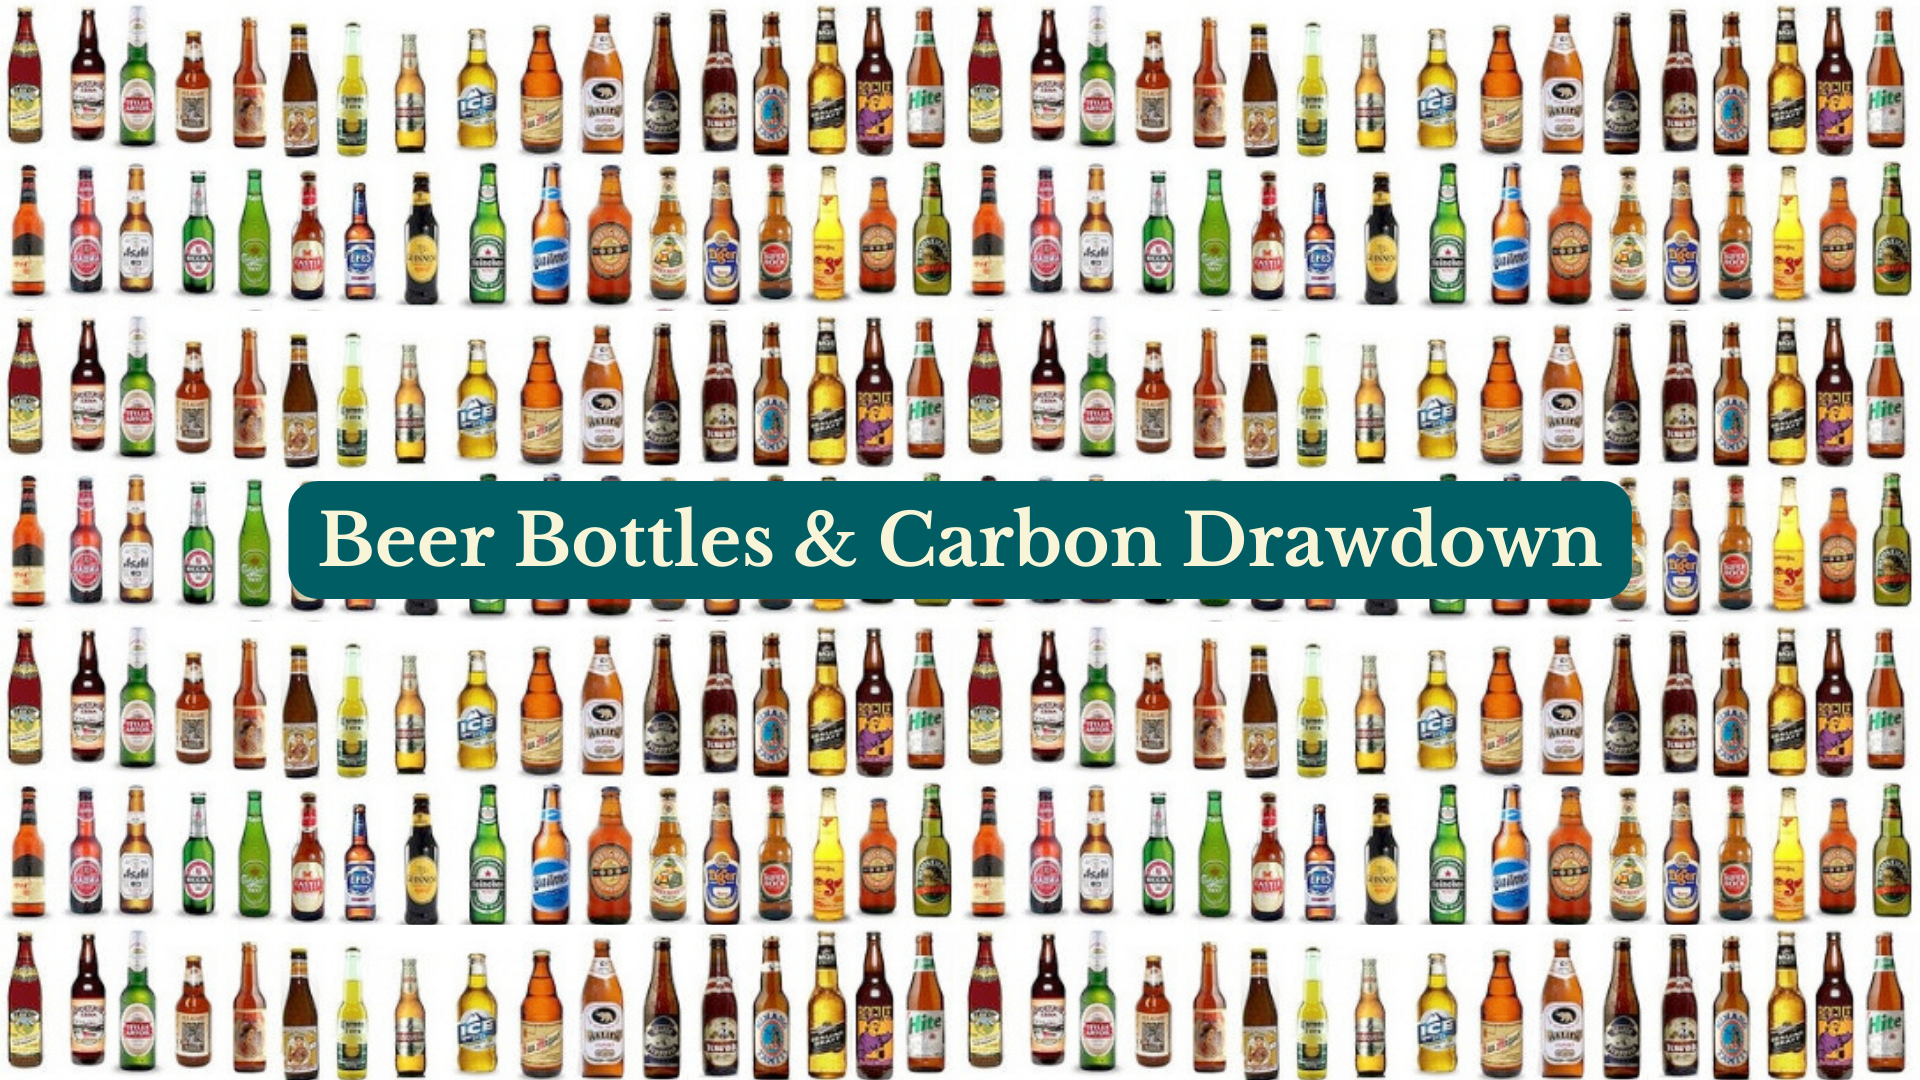 Beer bottles carbon drawdown effective climate action campaign